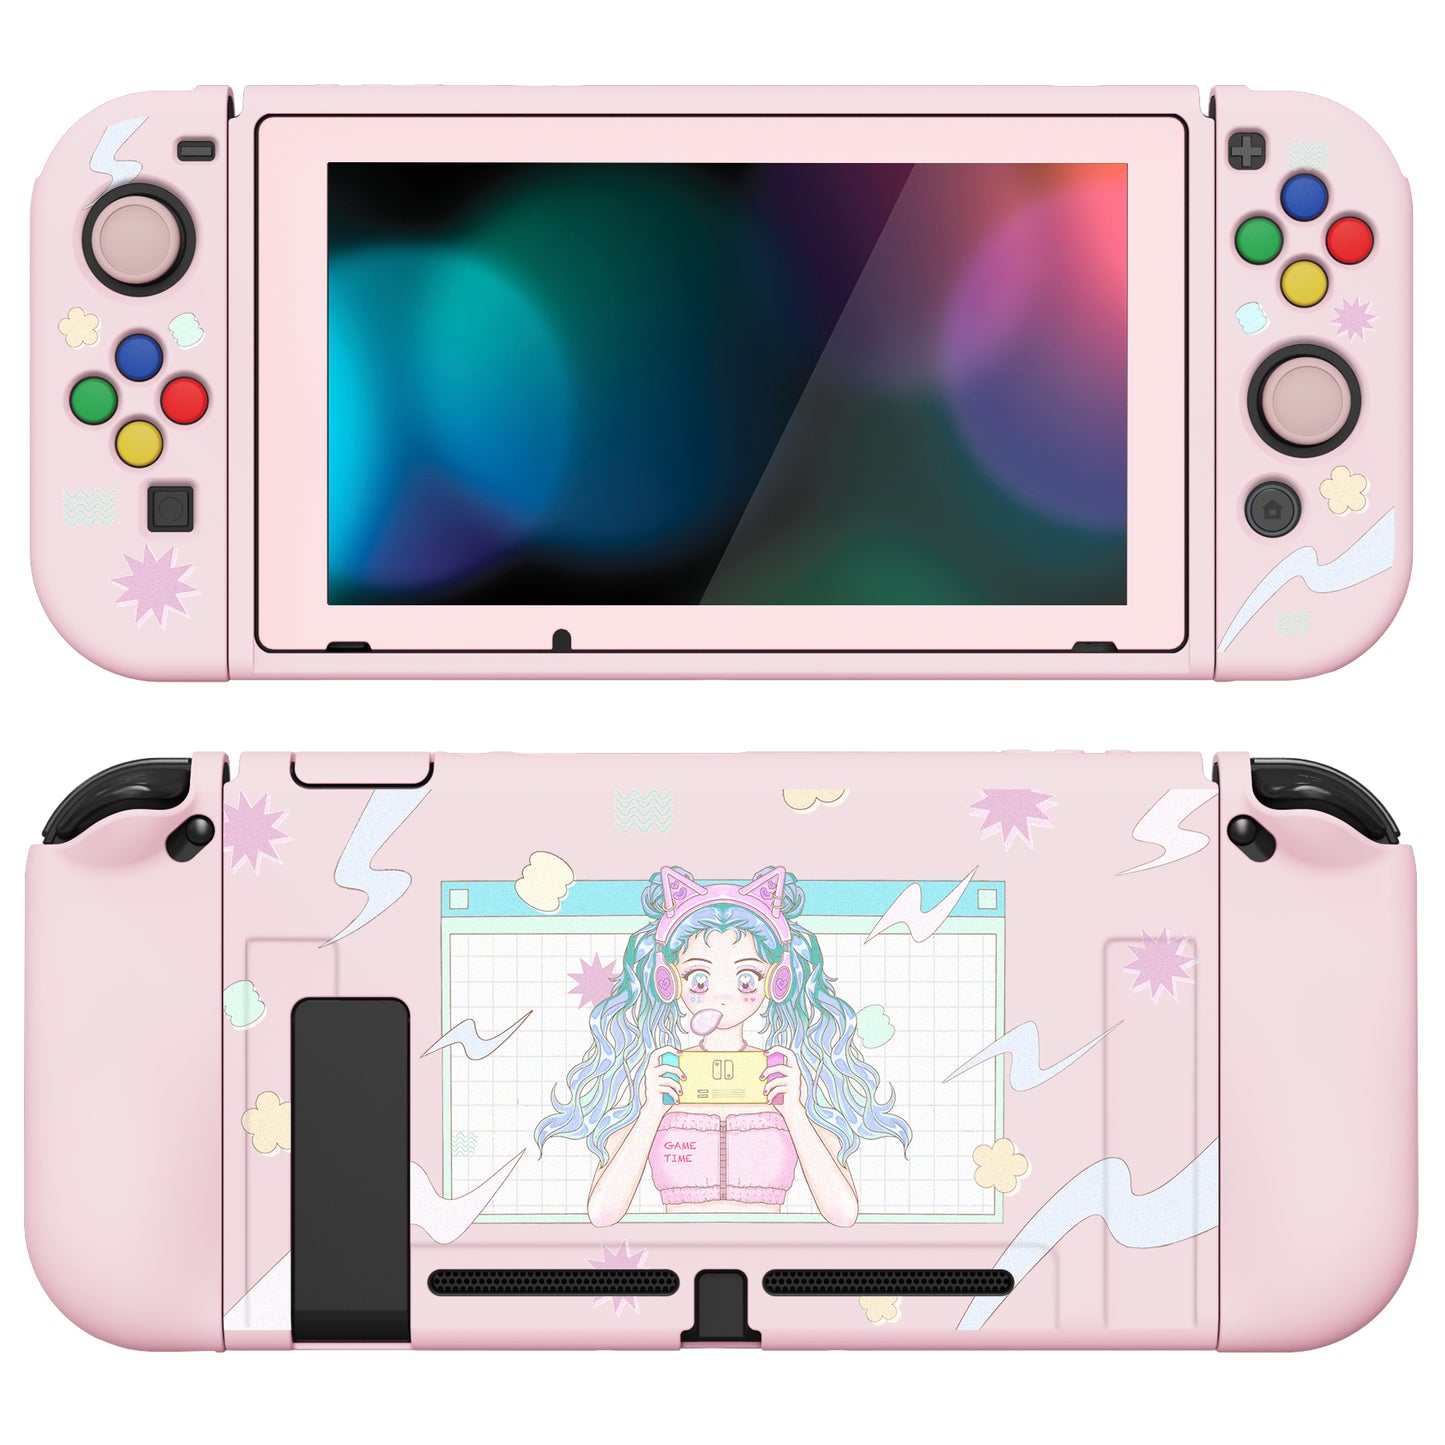 PlayVital ZealProtect Soft Protective Case for Nintendo Switch, Flexible Cover for Switch with Tempered Glass Screen Protector & Thumb Grips & ABXY Direction Button Caps - Gaming Girl - RNSYV6021 playvital